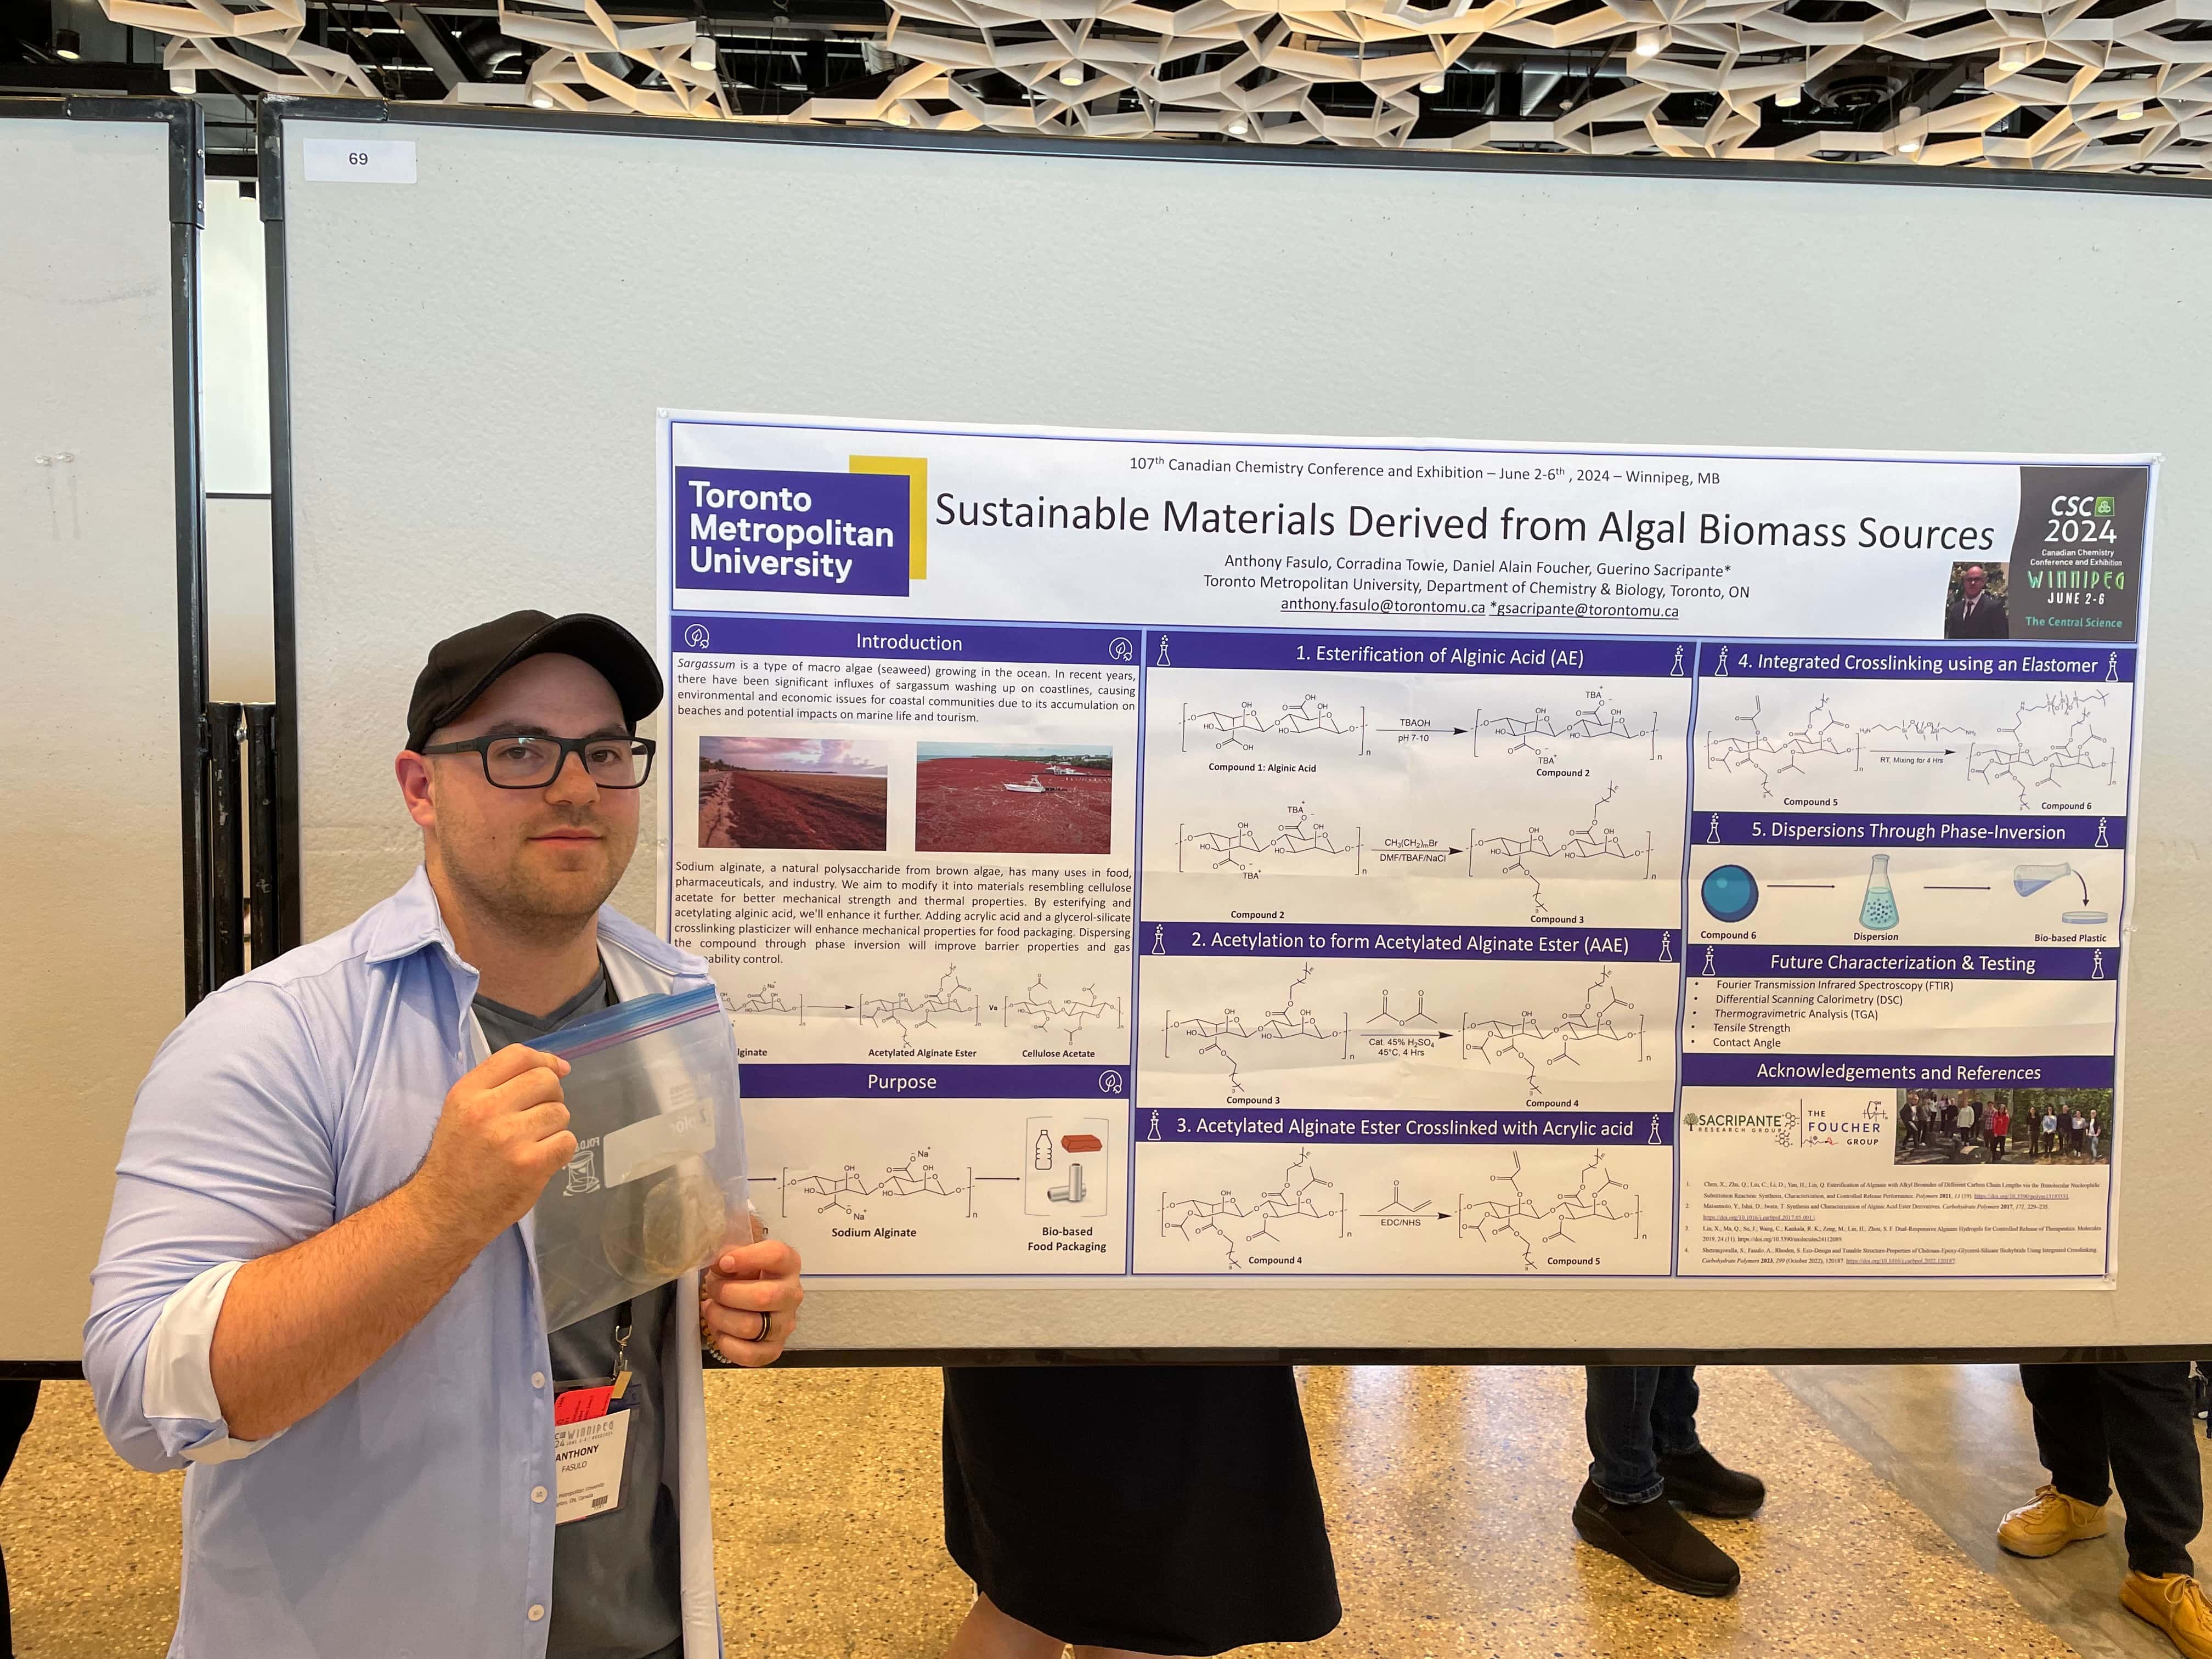 Anthony presenting his poster at the CSC in Winnipeg